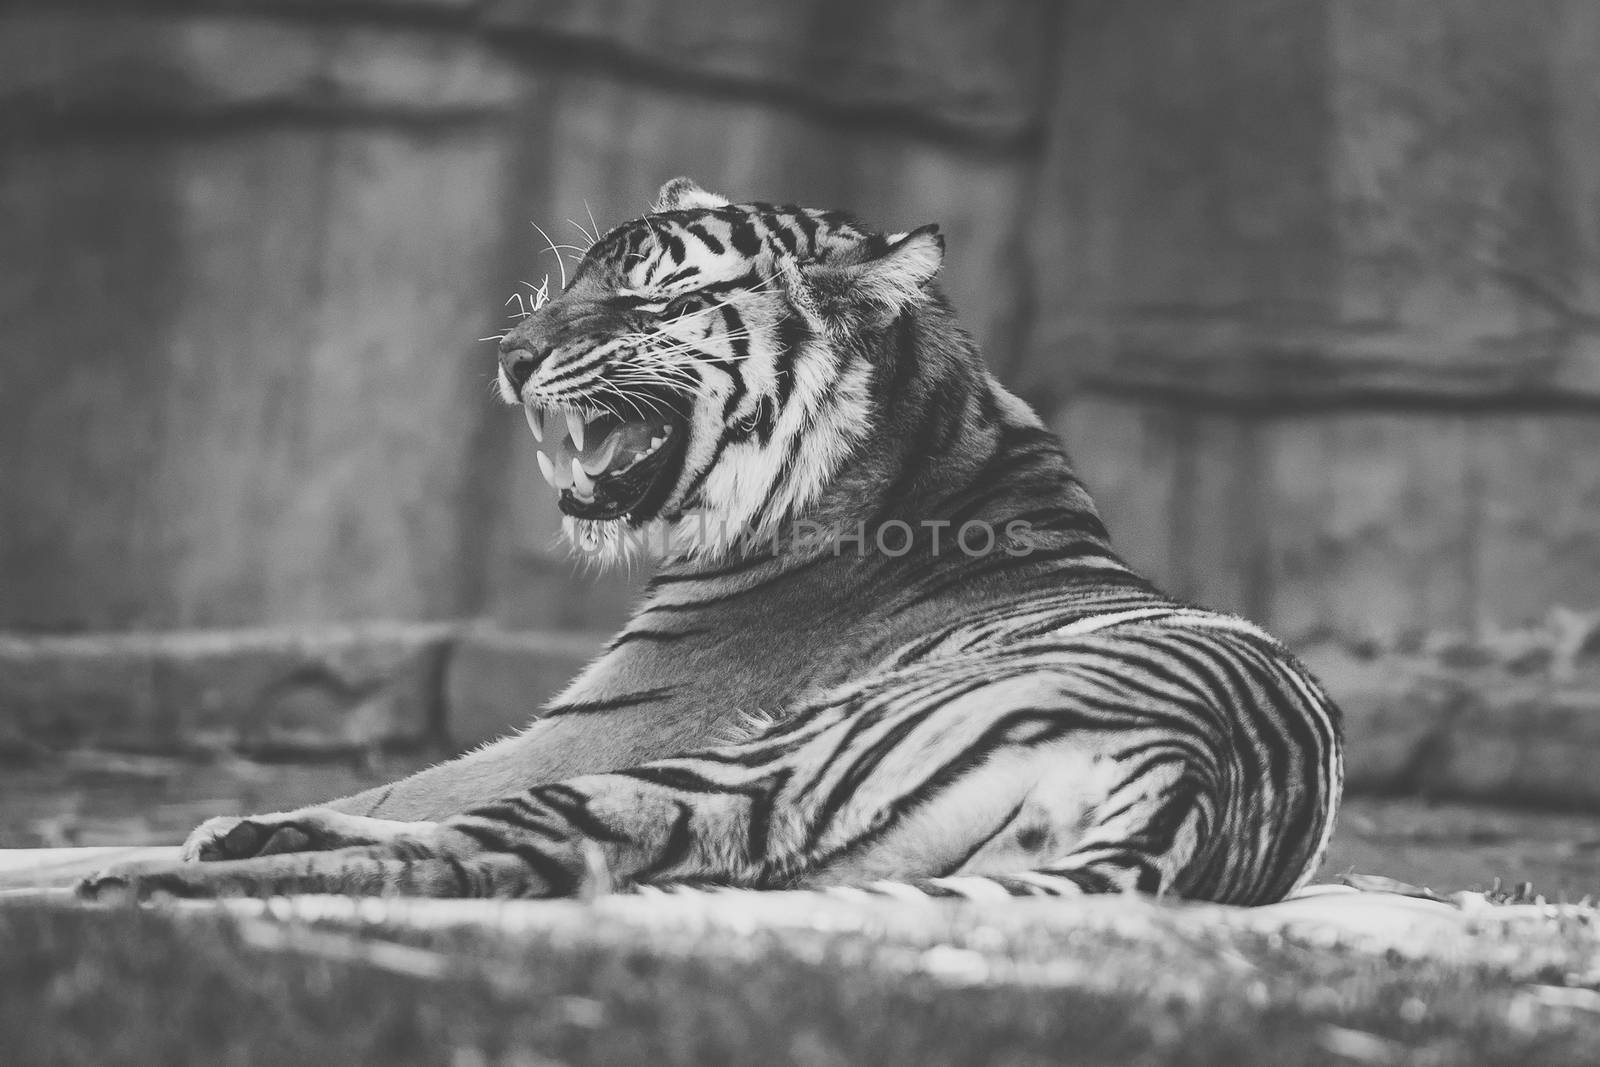 Large Bengal Tiger by itself outdoors during the day time.